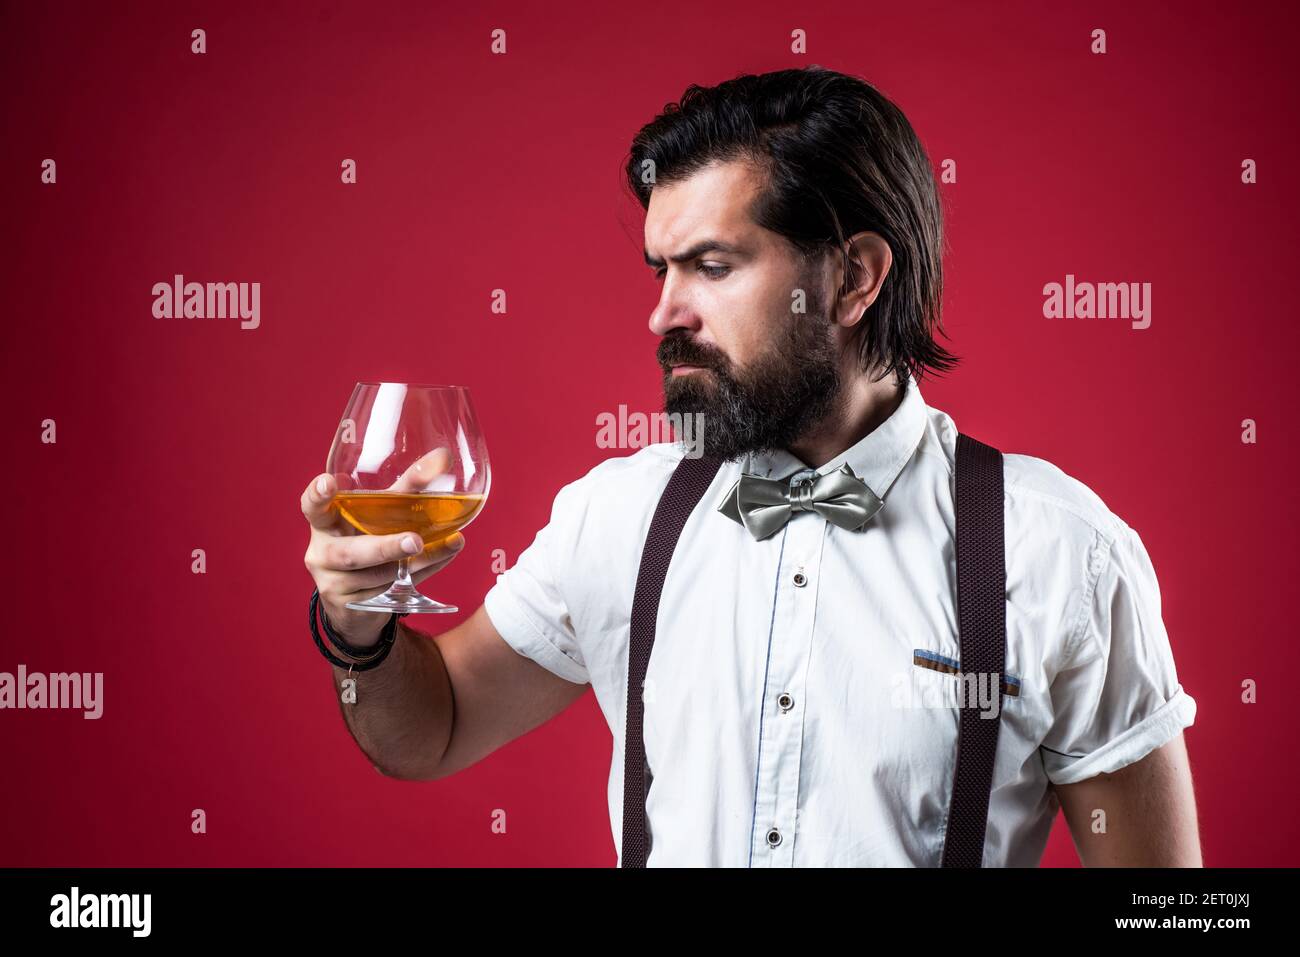 handsome guy hipster with moustache and beard drink kignac, barkeeper. Stock Photo